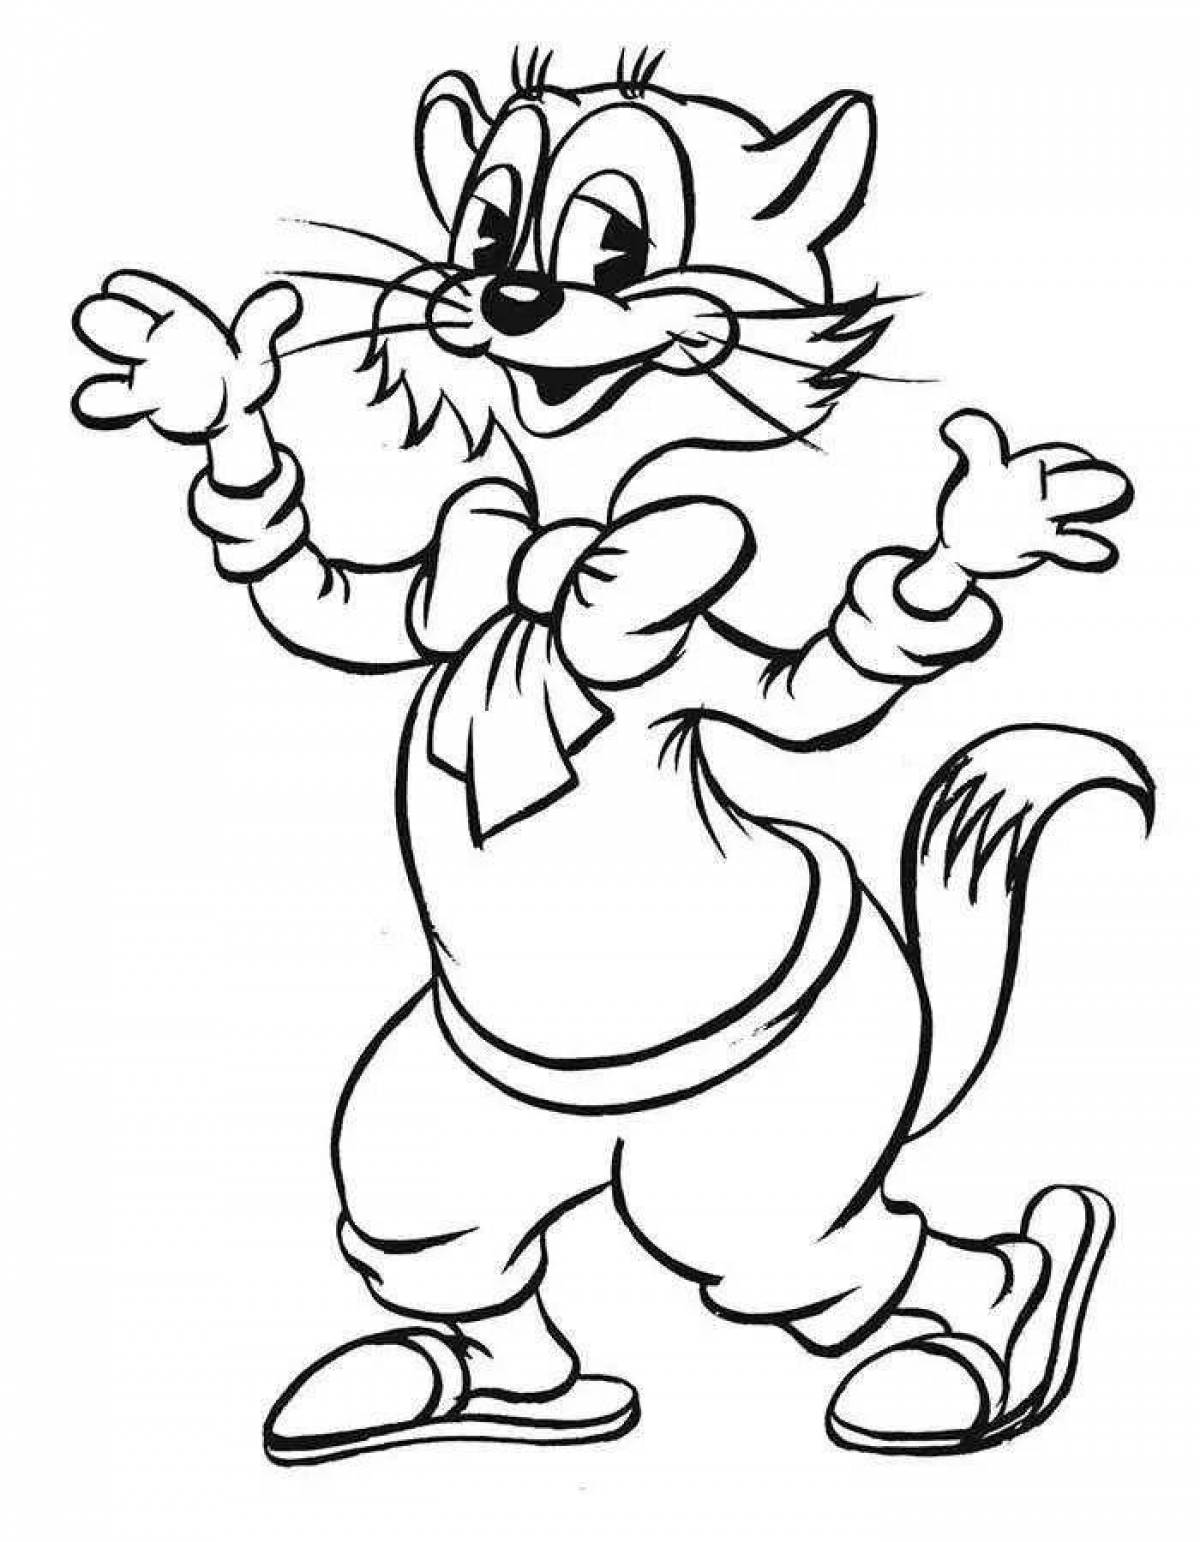 Cute cartoon character coloring page